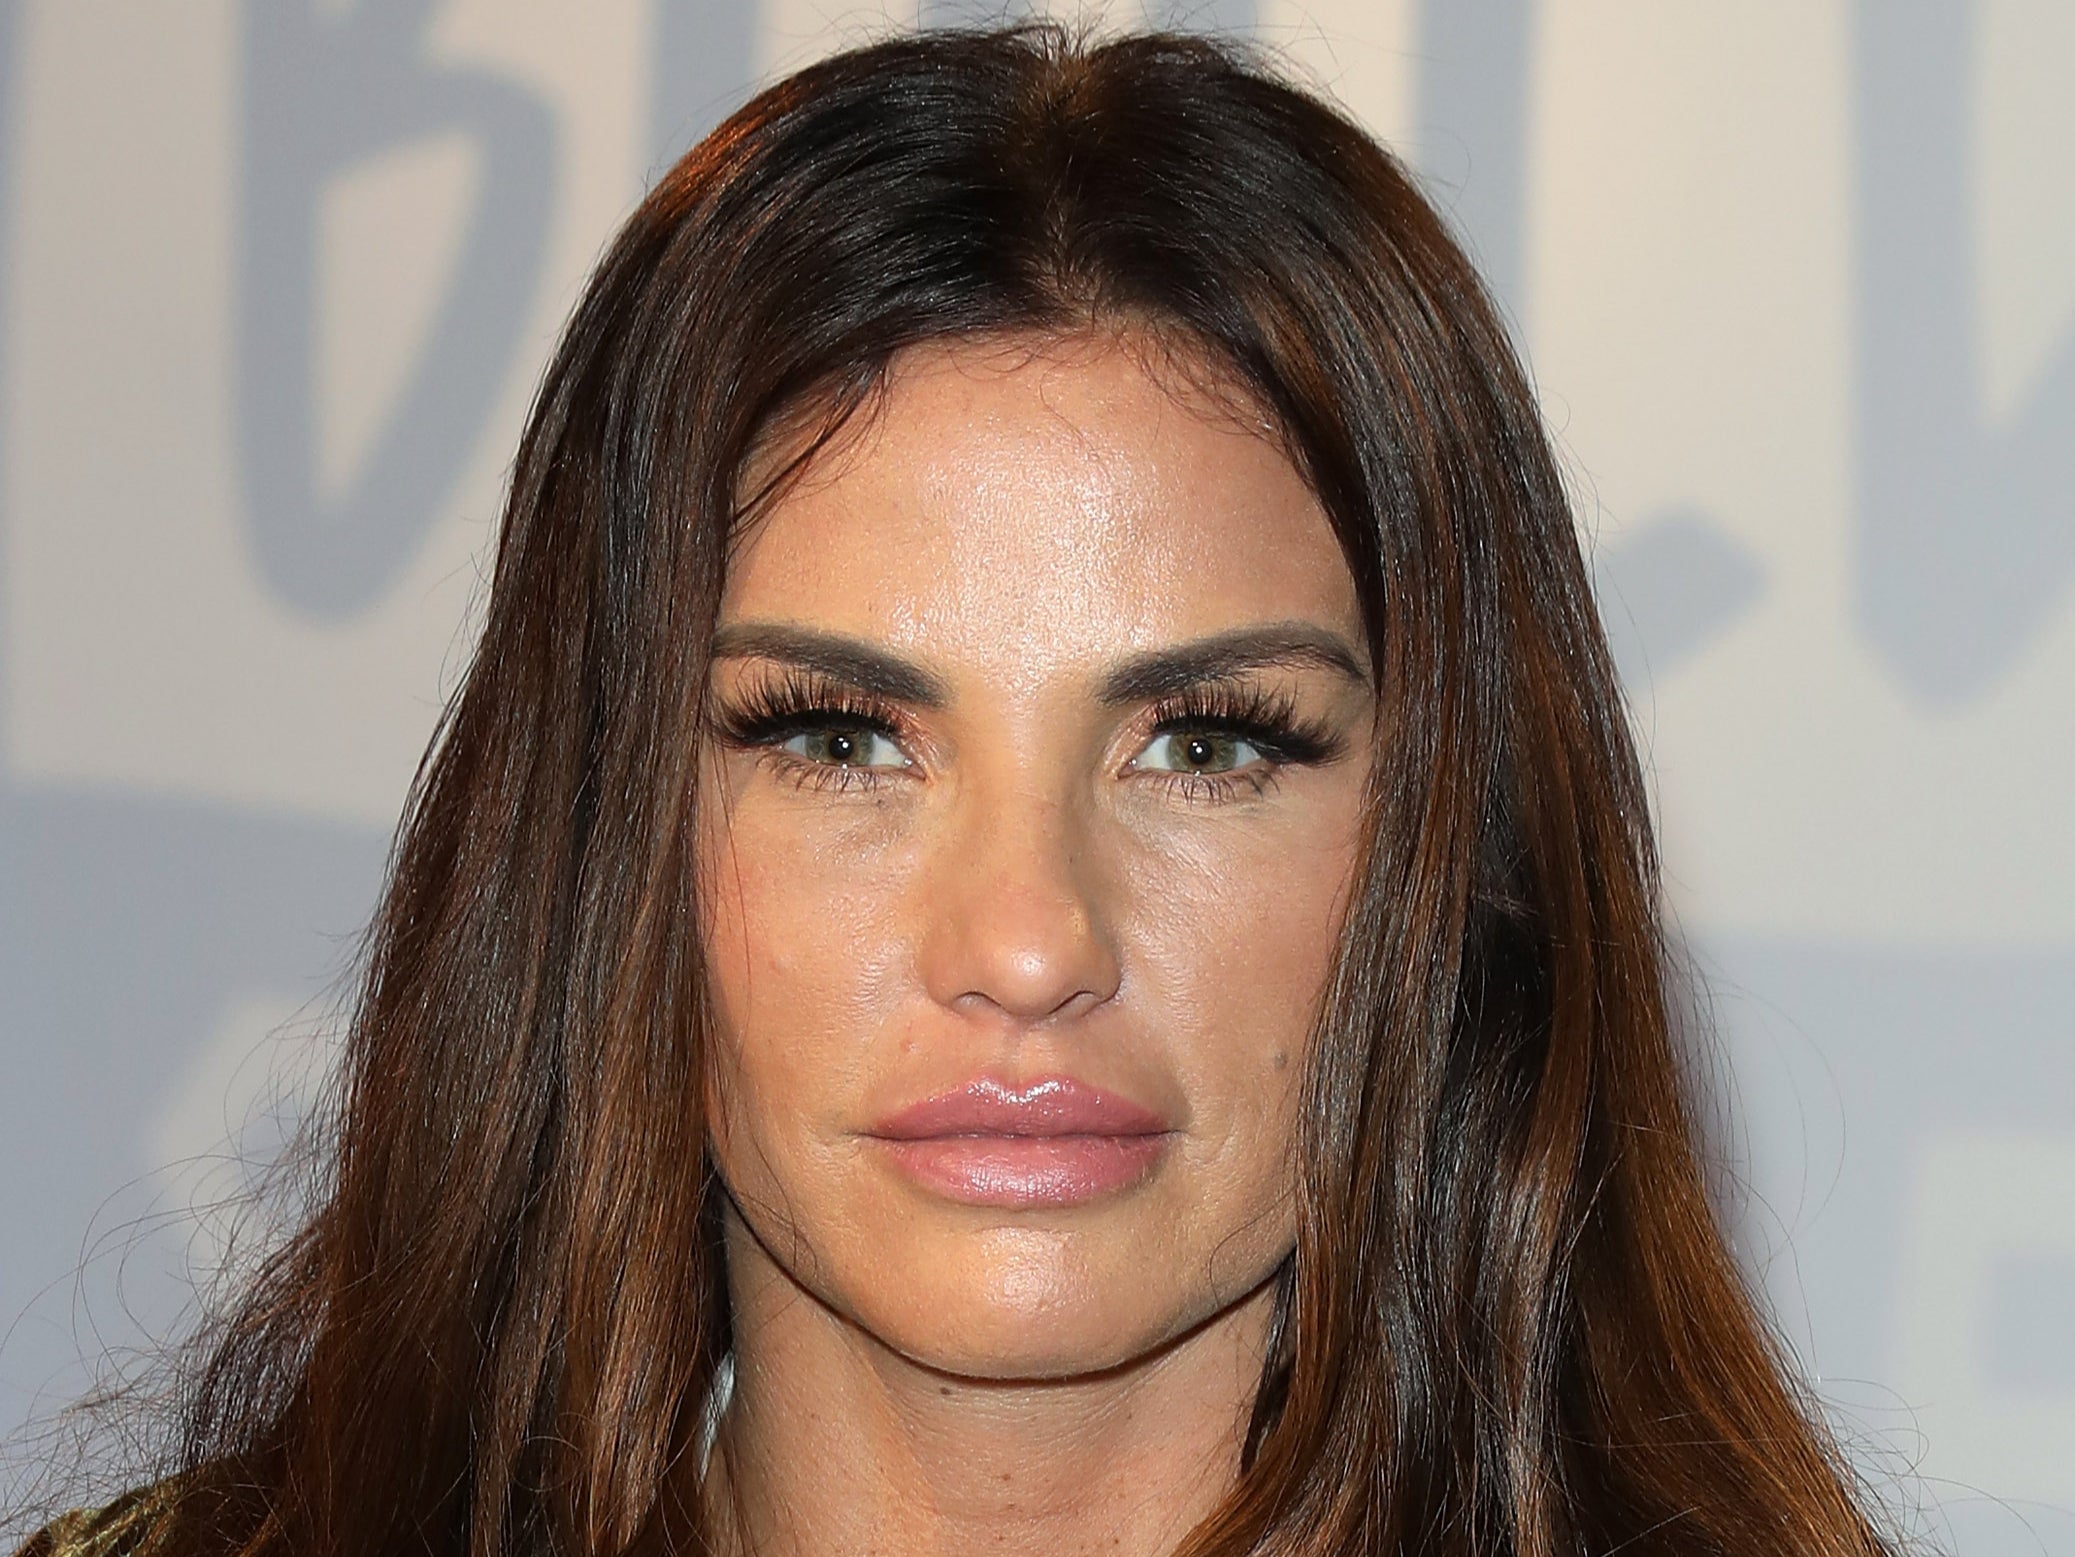 Katie Price reveals she was raped at gunpoint in South Africa carjacking The Independent pic